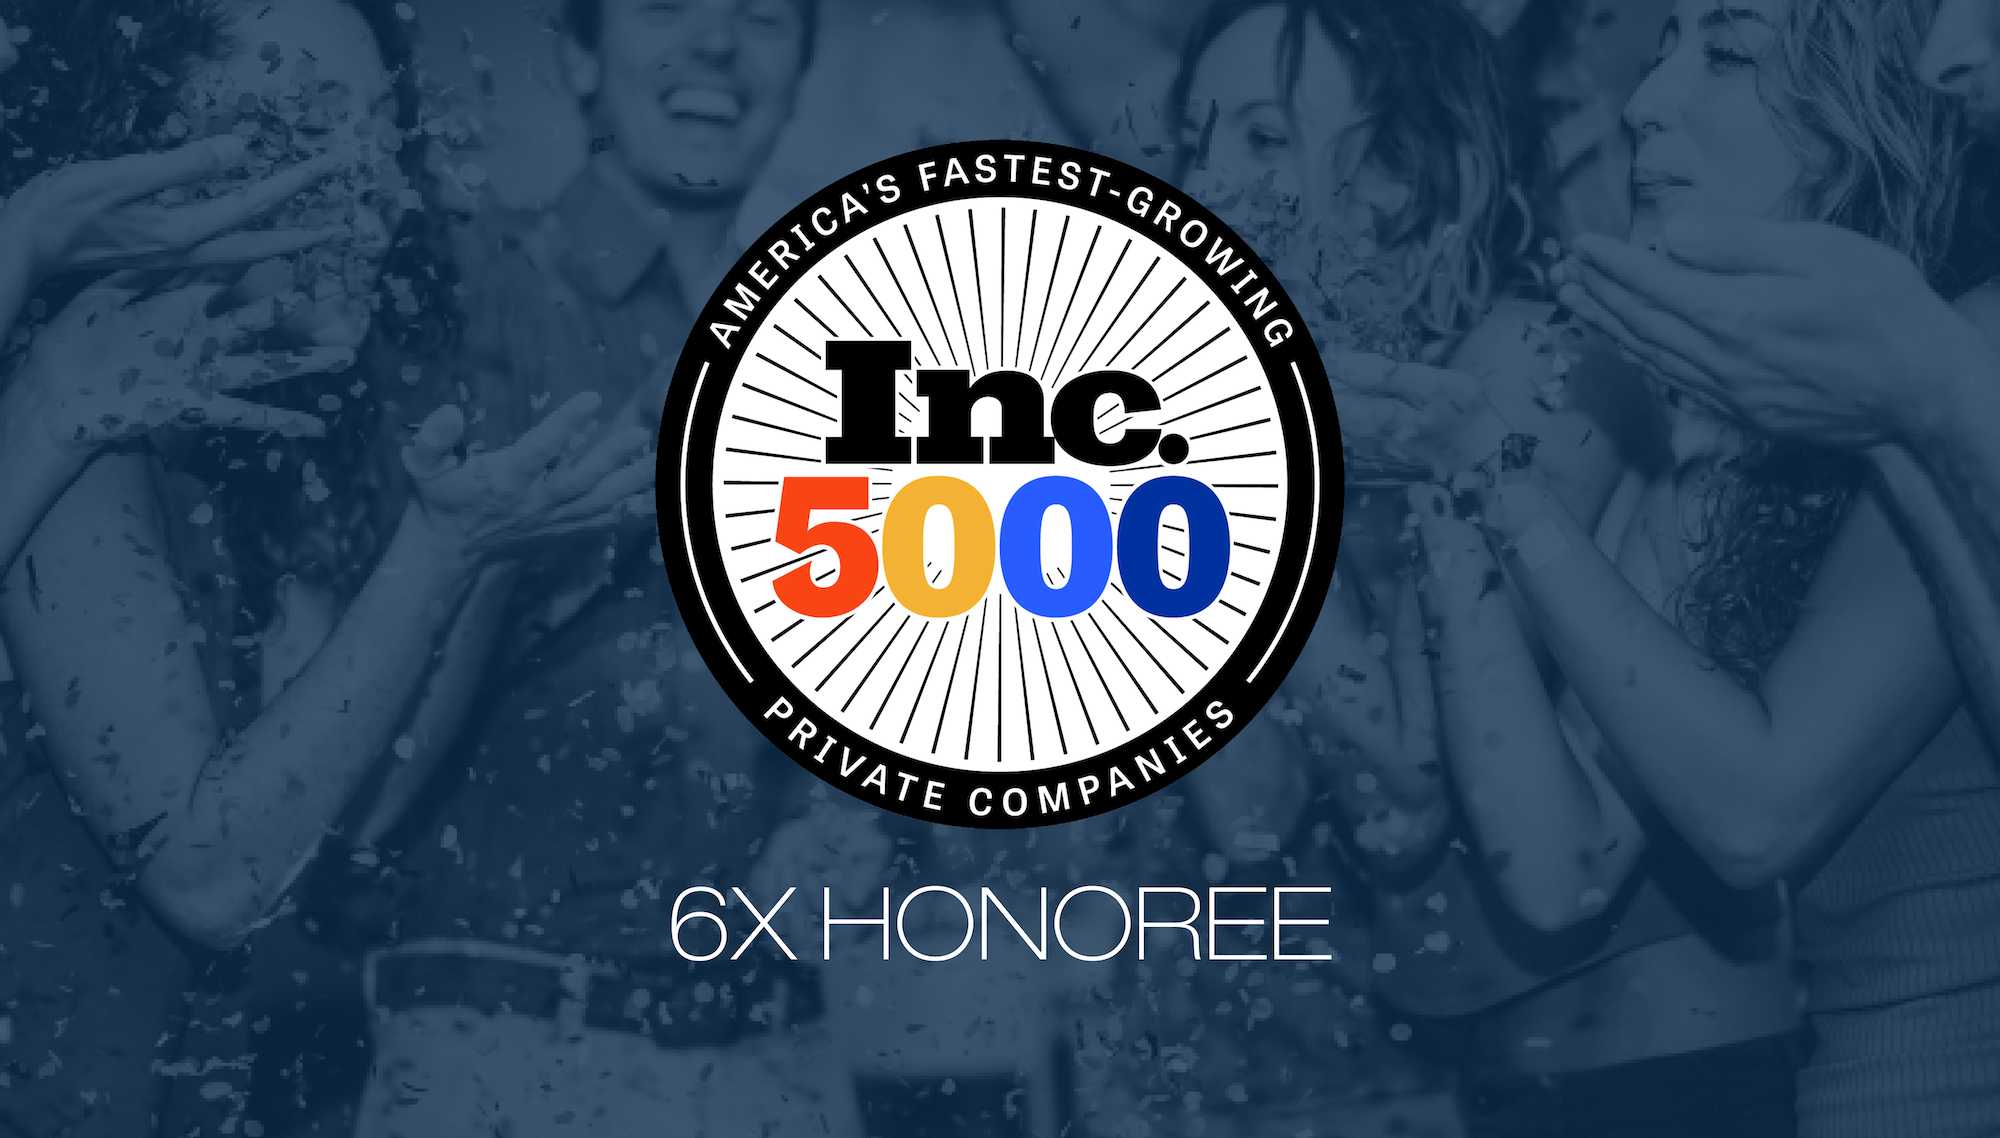 Optomi Professional Services Recognized As An Inc 5000 Fastest Growing Company for the 6th Year in a Row